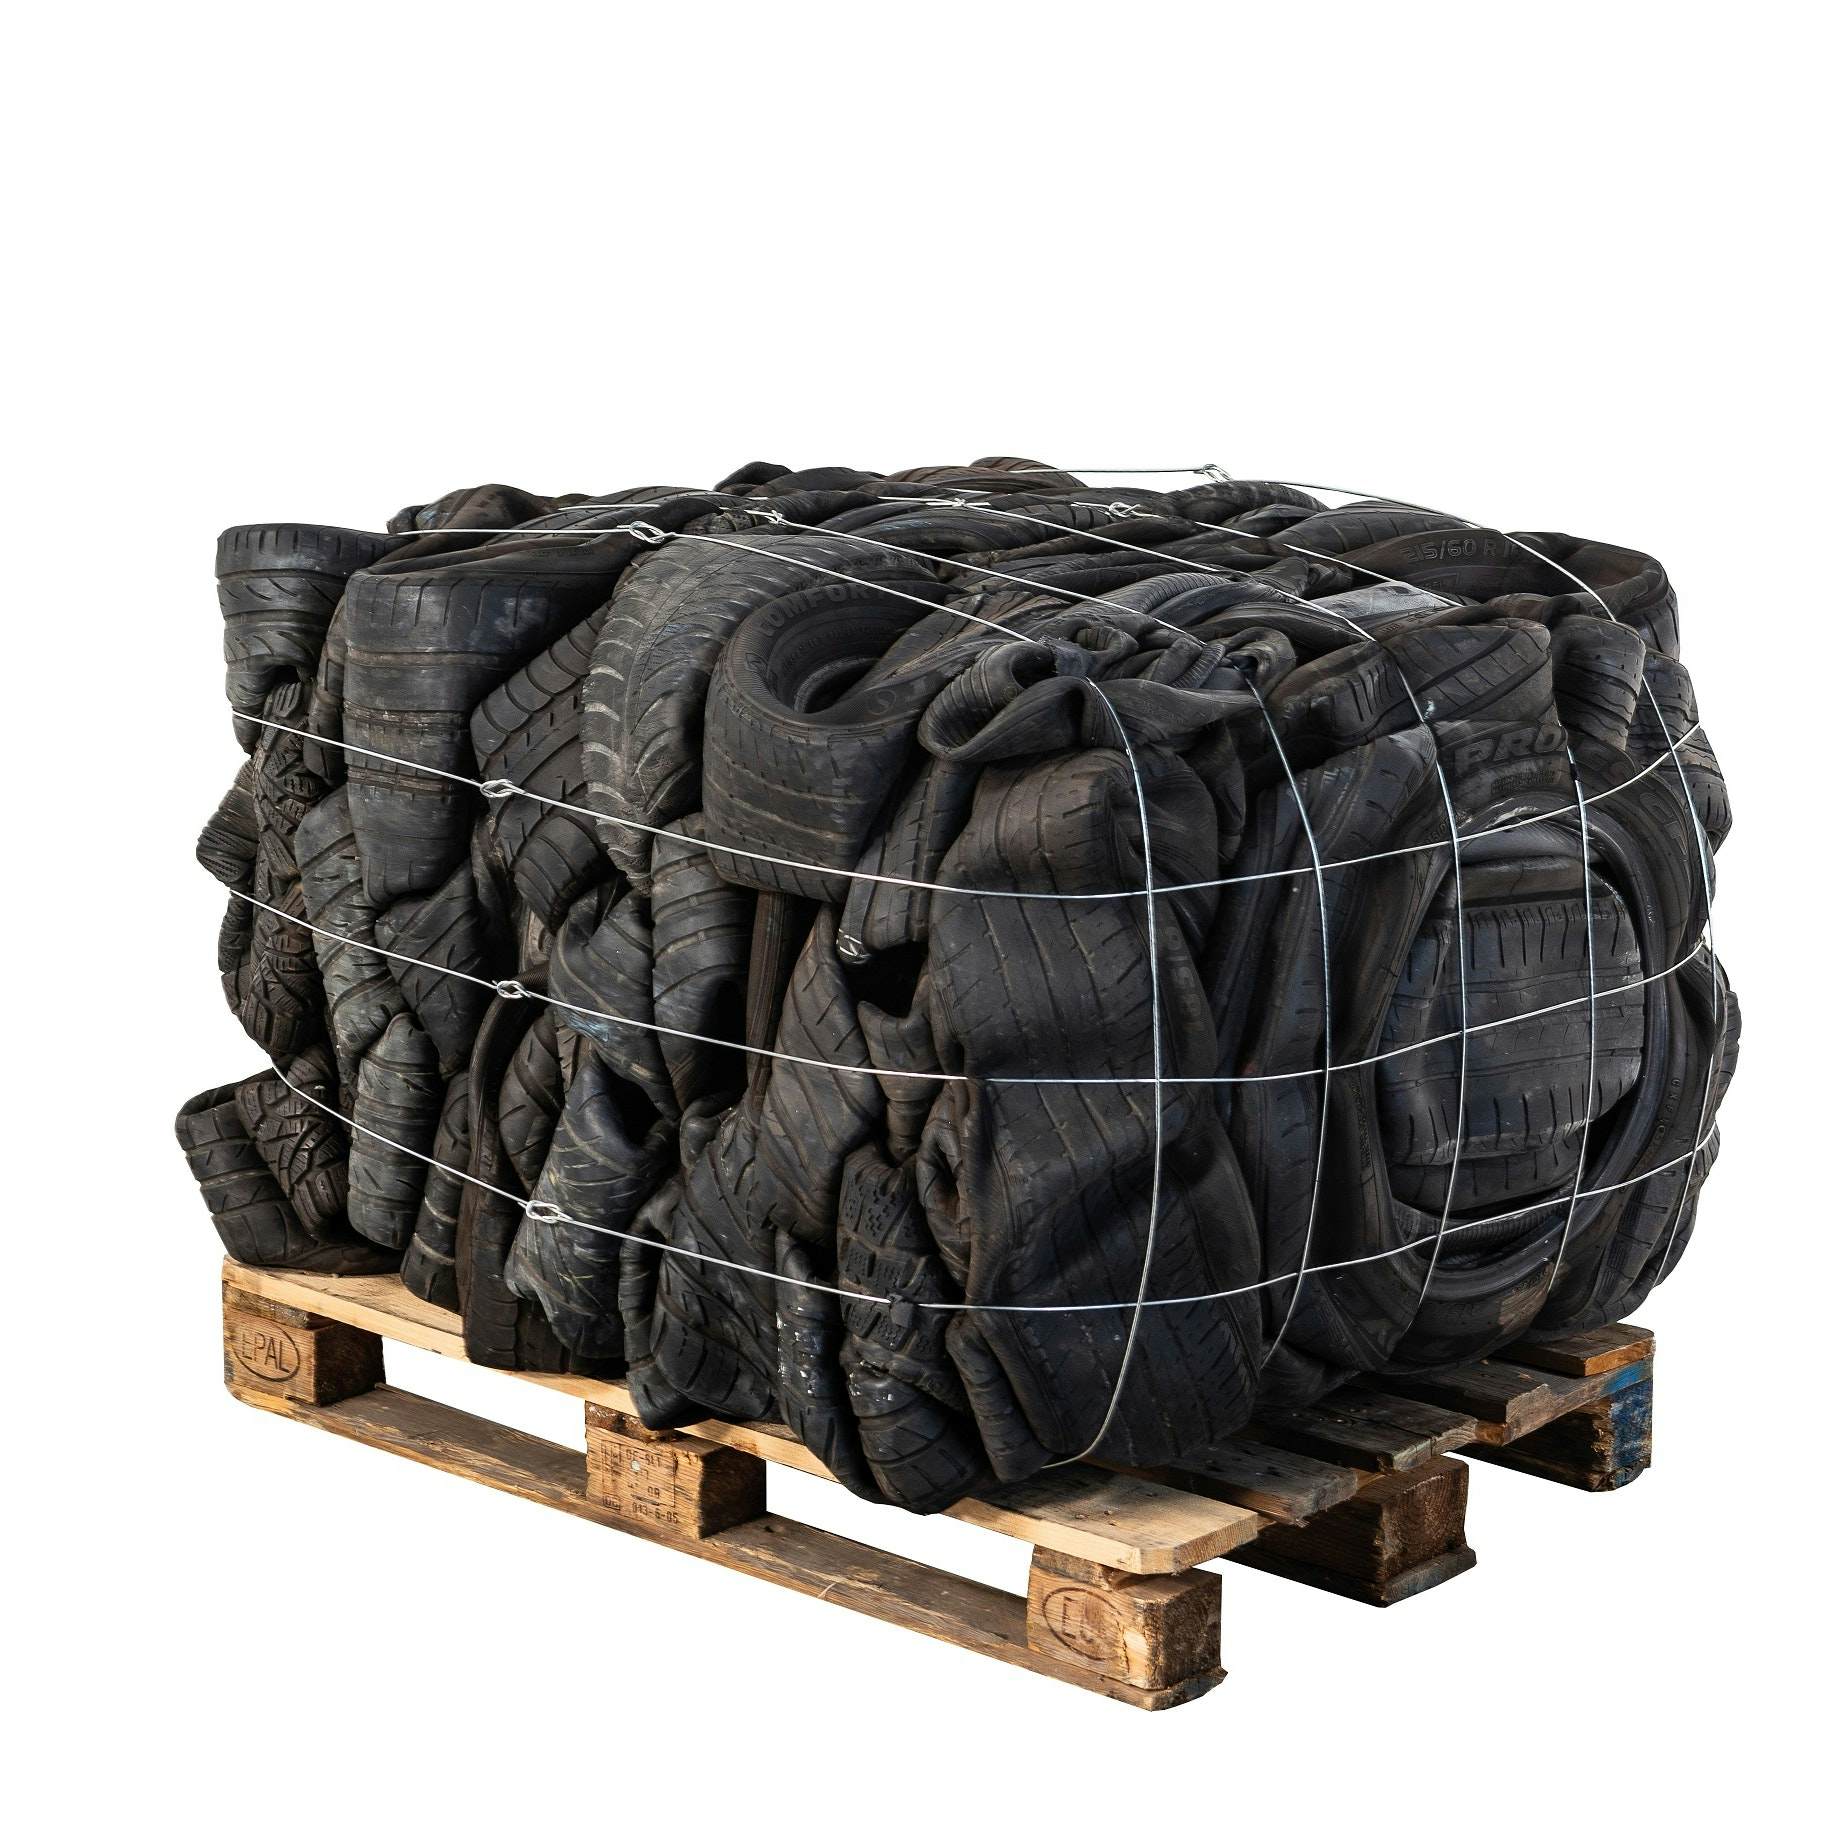 Bale of car tires from AP42F